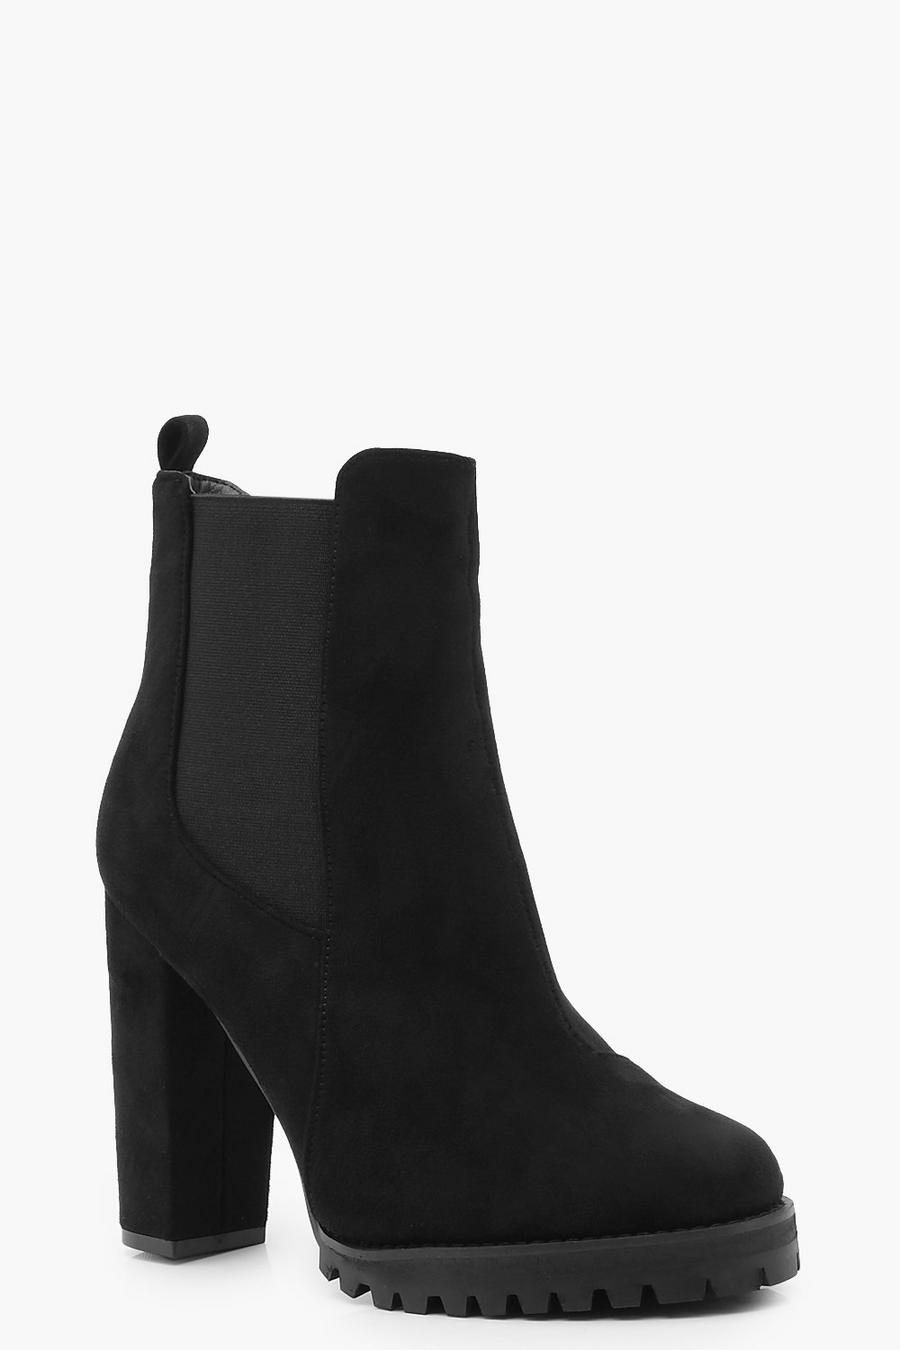 Cleated Platform Suedette Pull On Chelsea Boots | boohoo